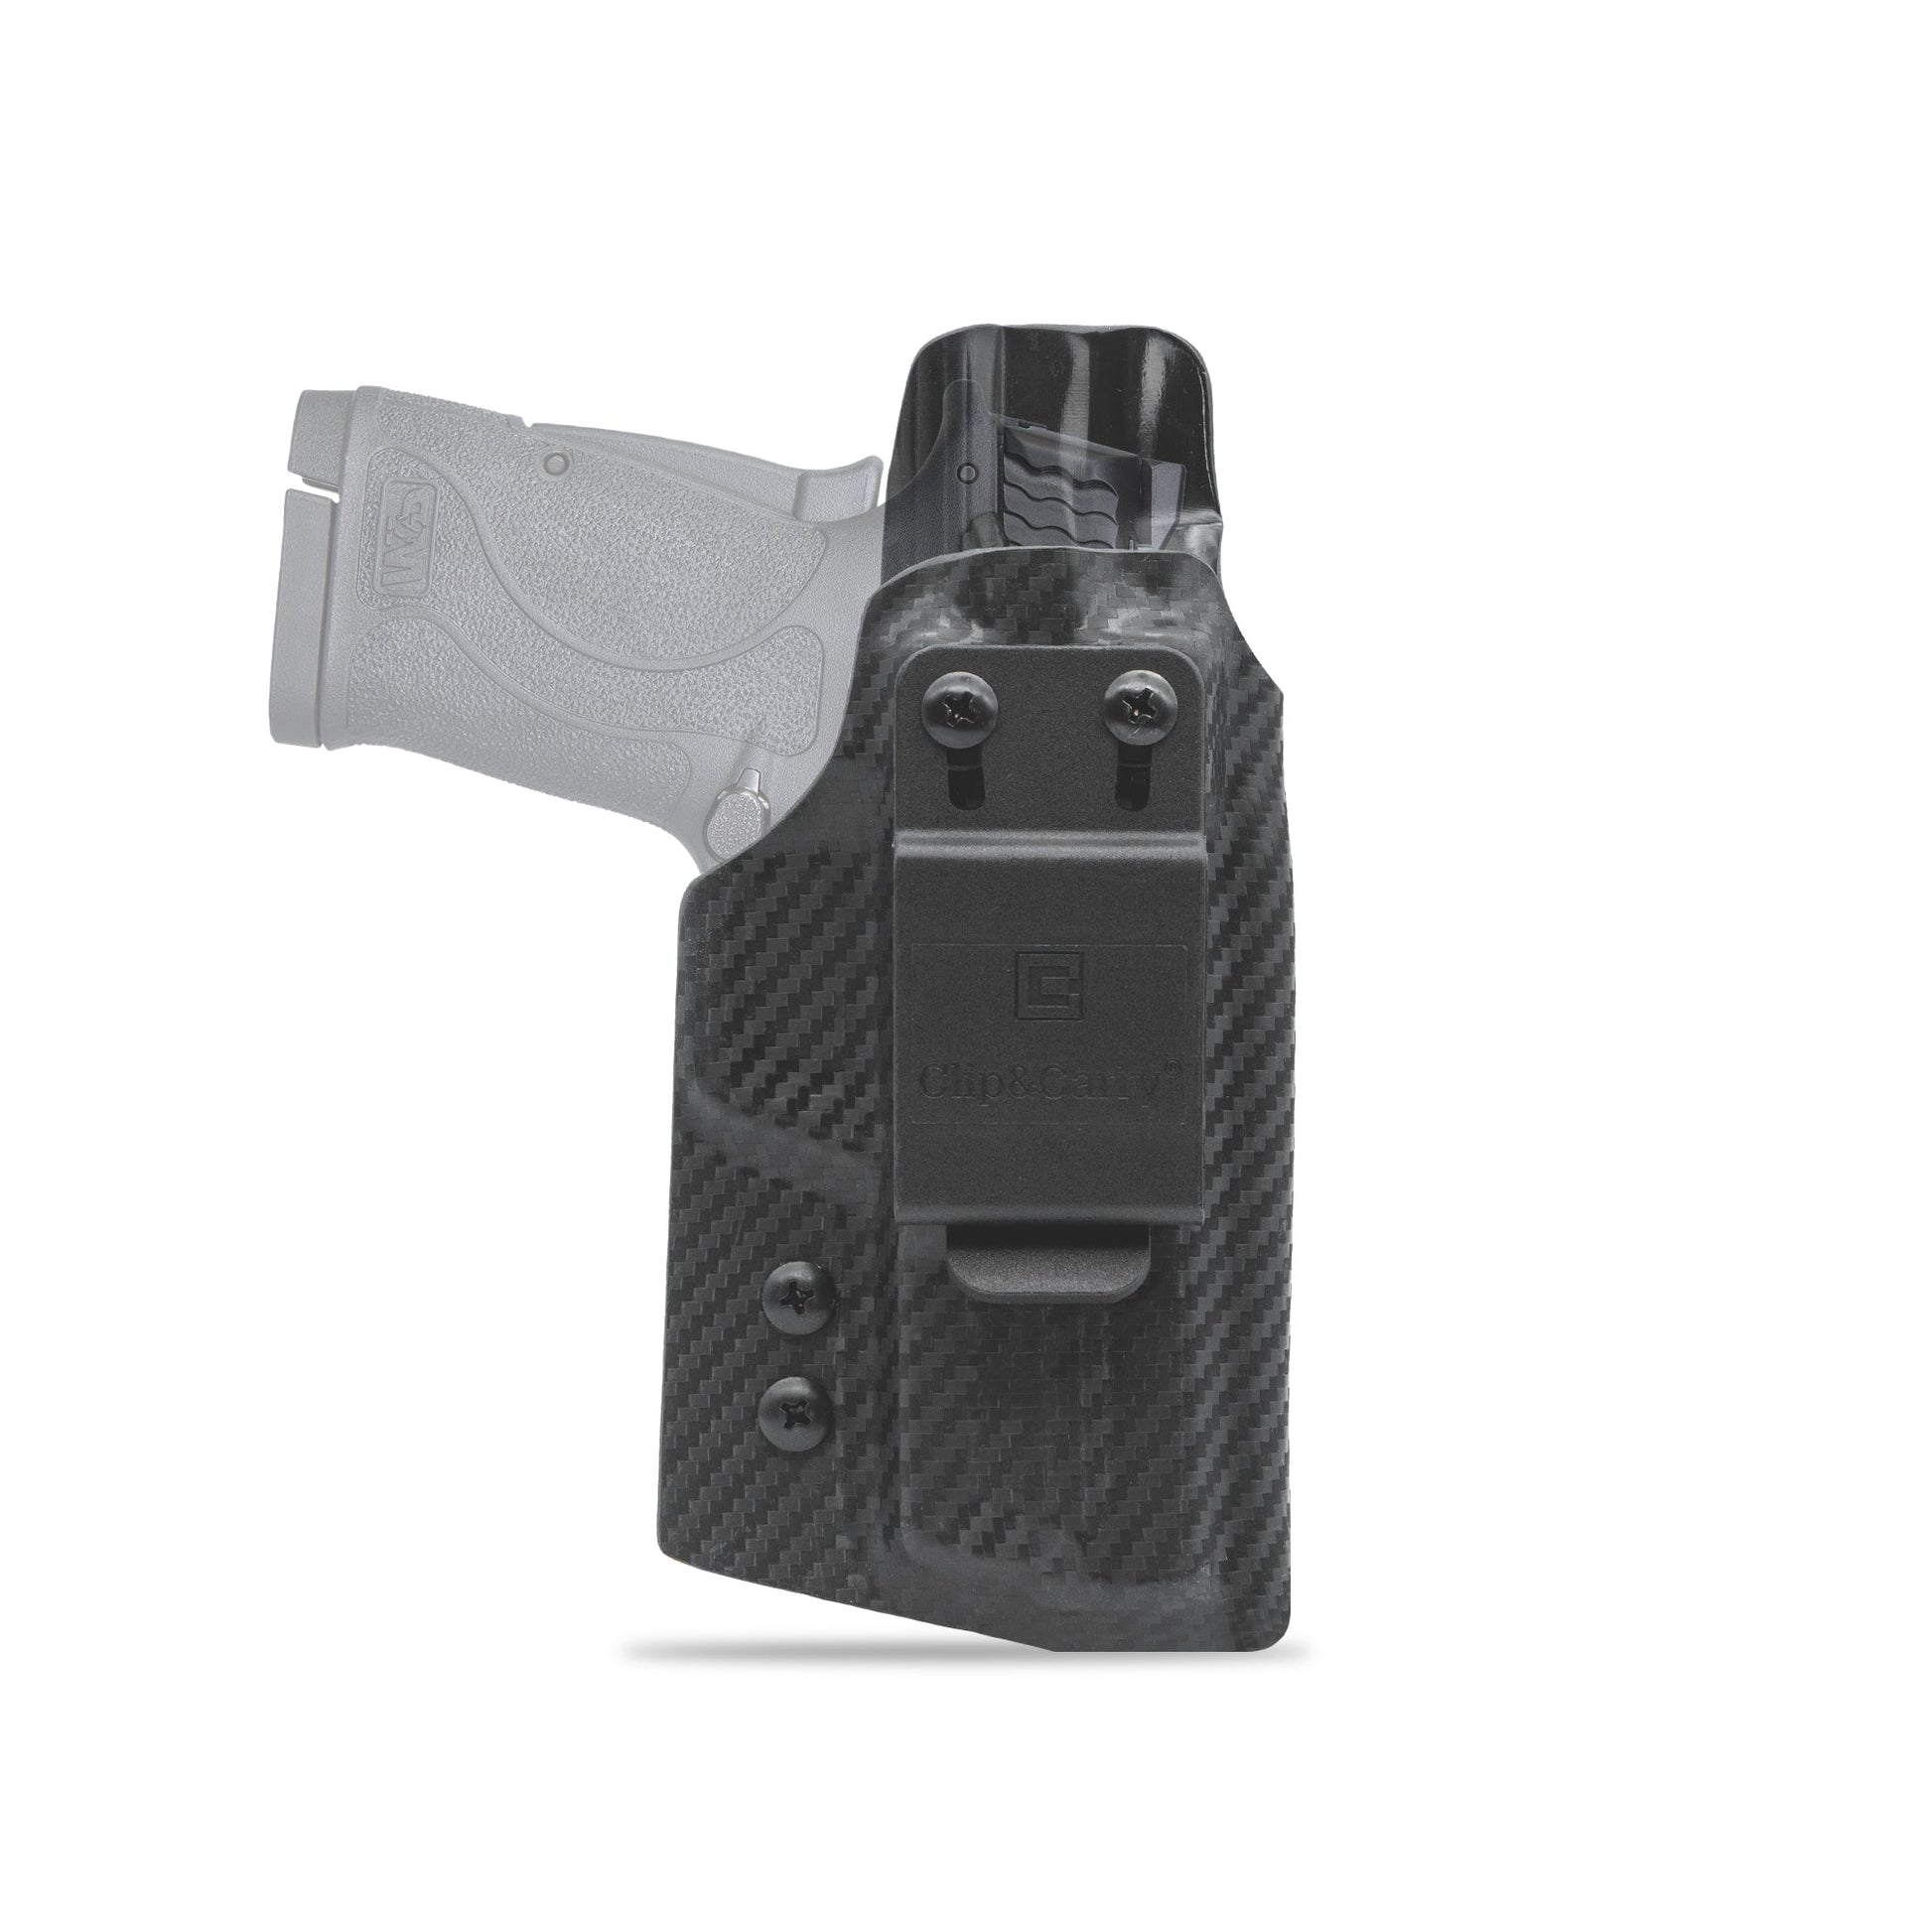 IWB Holster for the Smith & Wesson Shield EZ .380 Clip & Carry